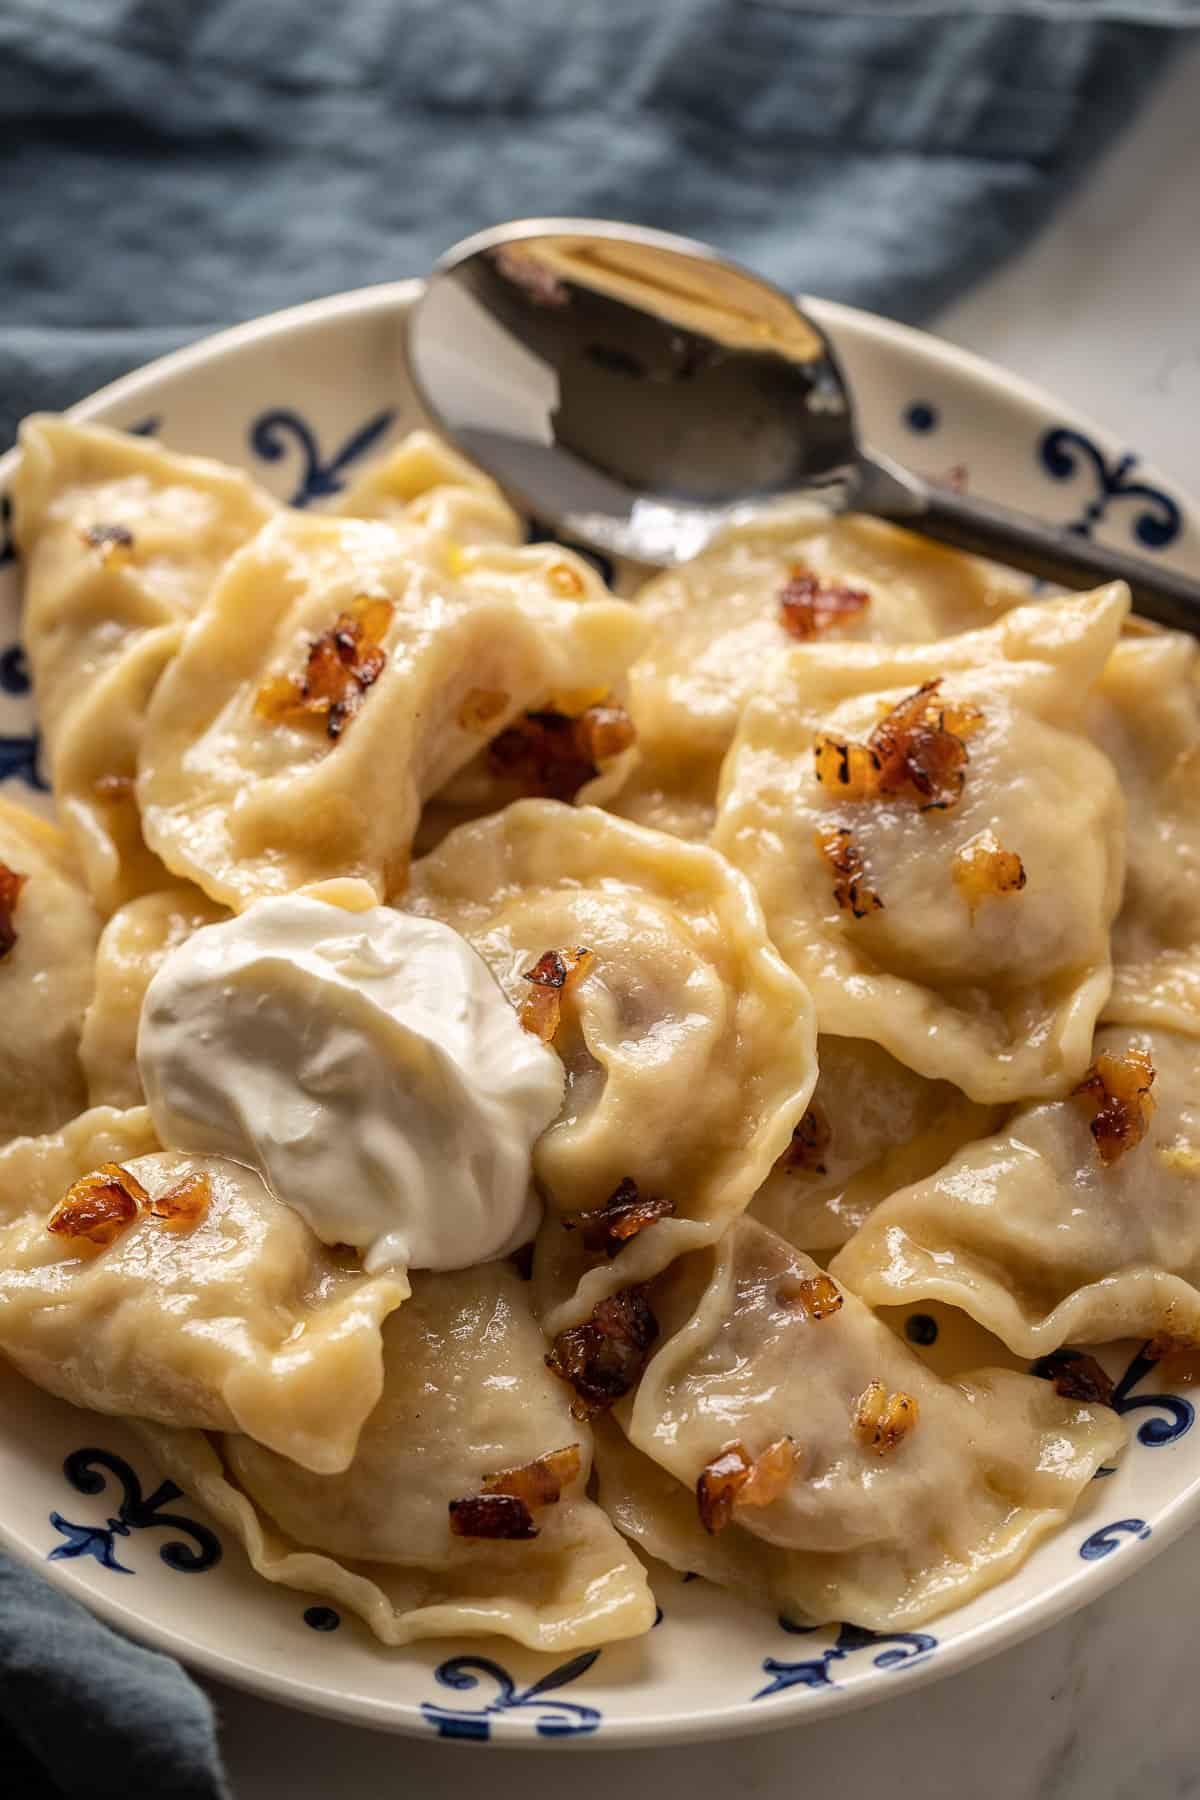 A plate full of potato perogies, sprinkled with caramelized onions and a dollop of sour cream, with a blue napkin in the background.